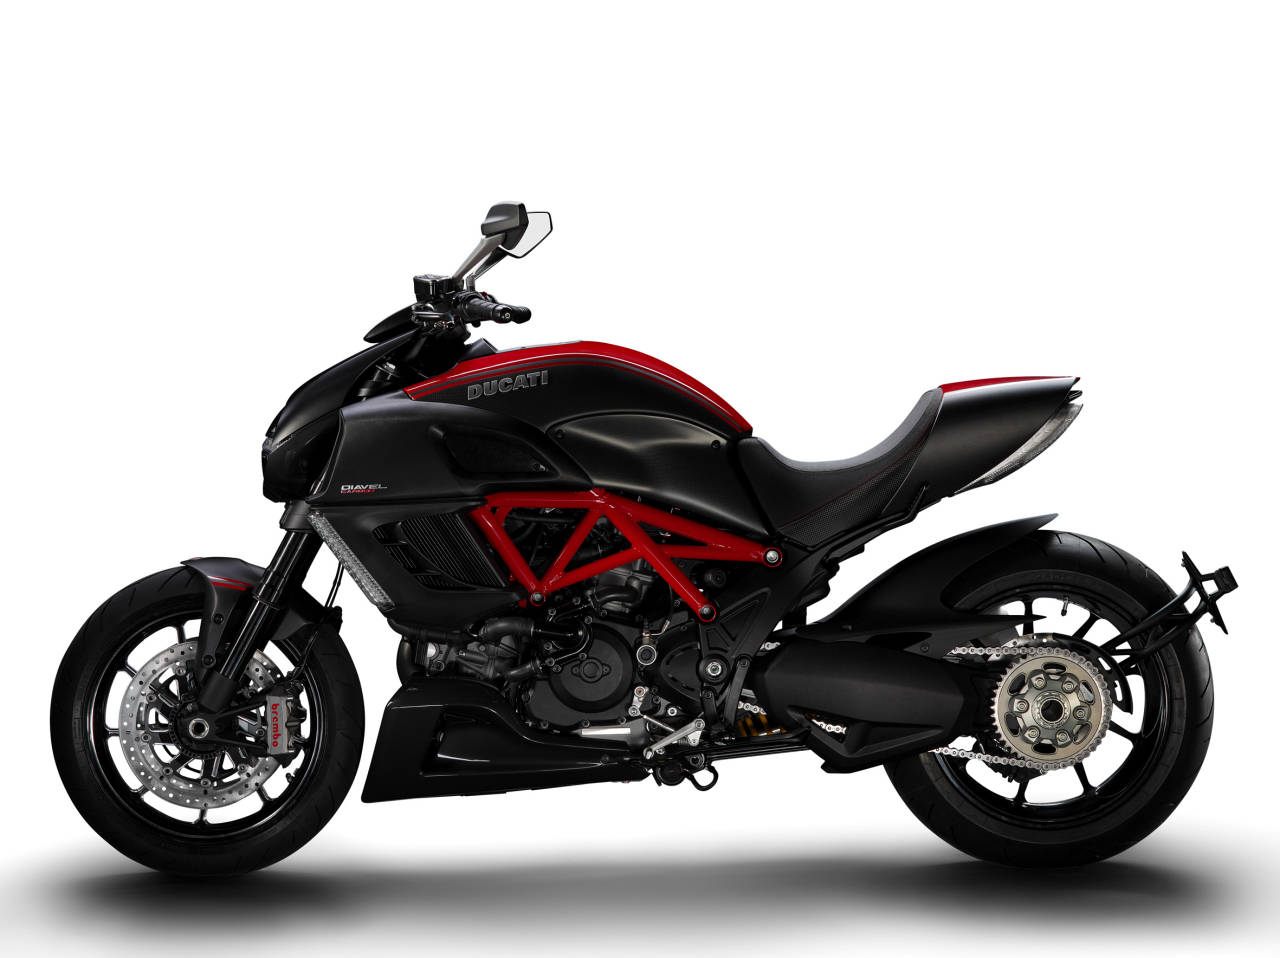 Top Motorcycle Wallpapers 2011 Ducati Diavel Carbon First Look 1280x958